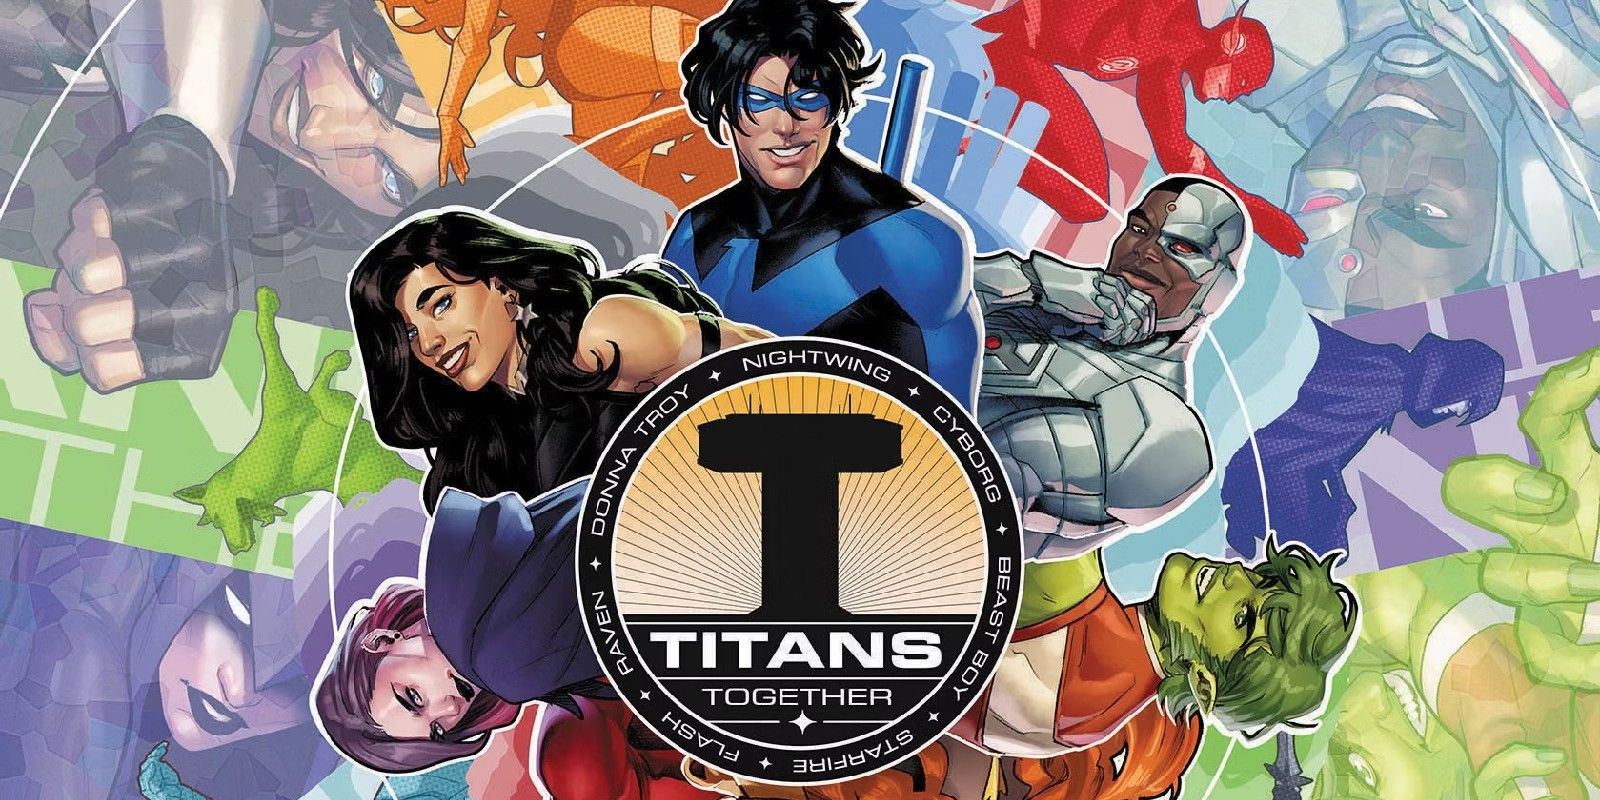 Titans Arranged in a Circle Around an Emblem Campnell Variant Cover